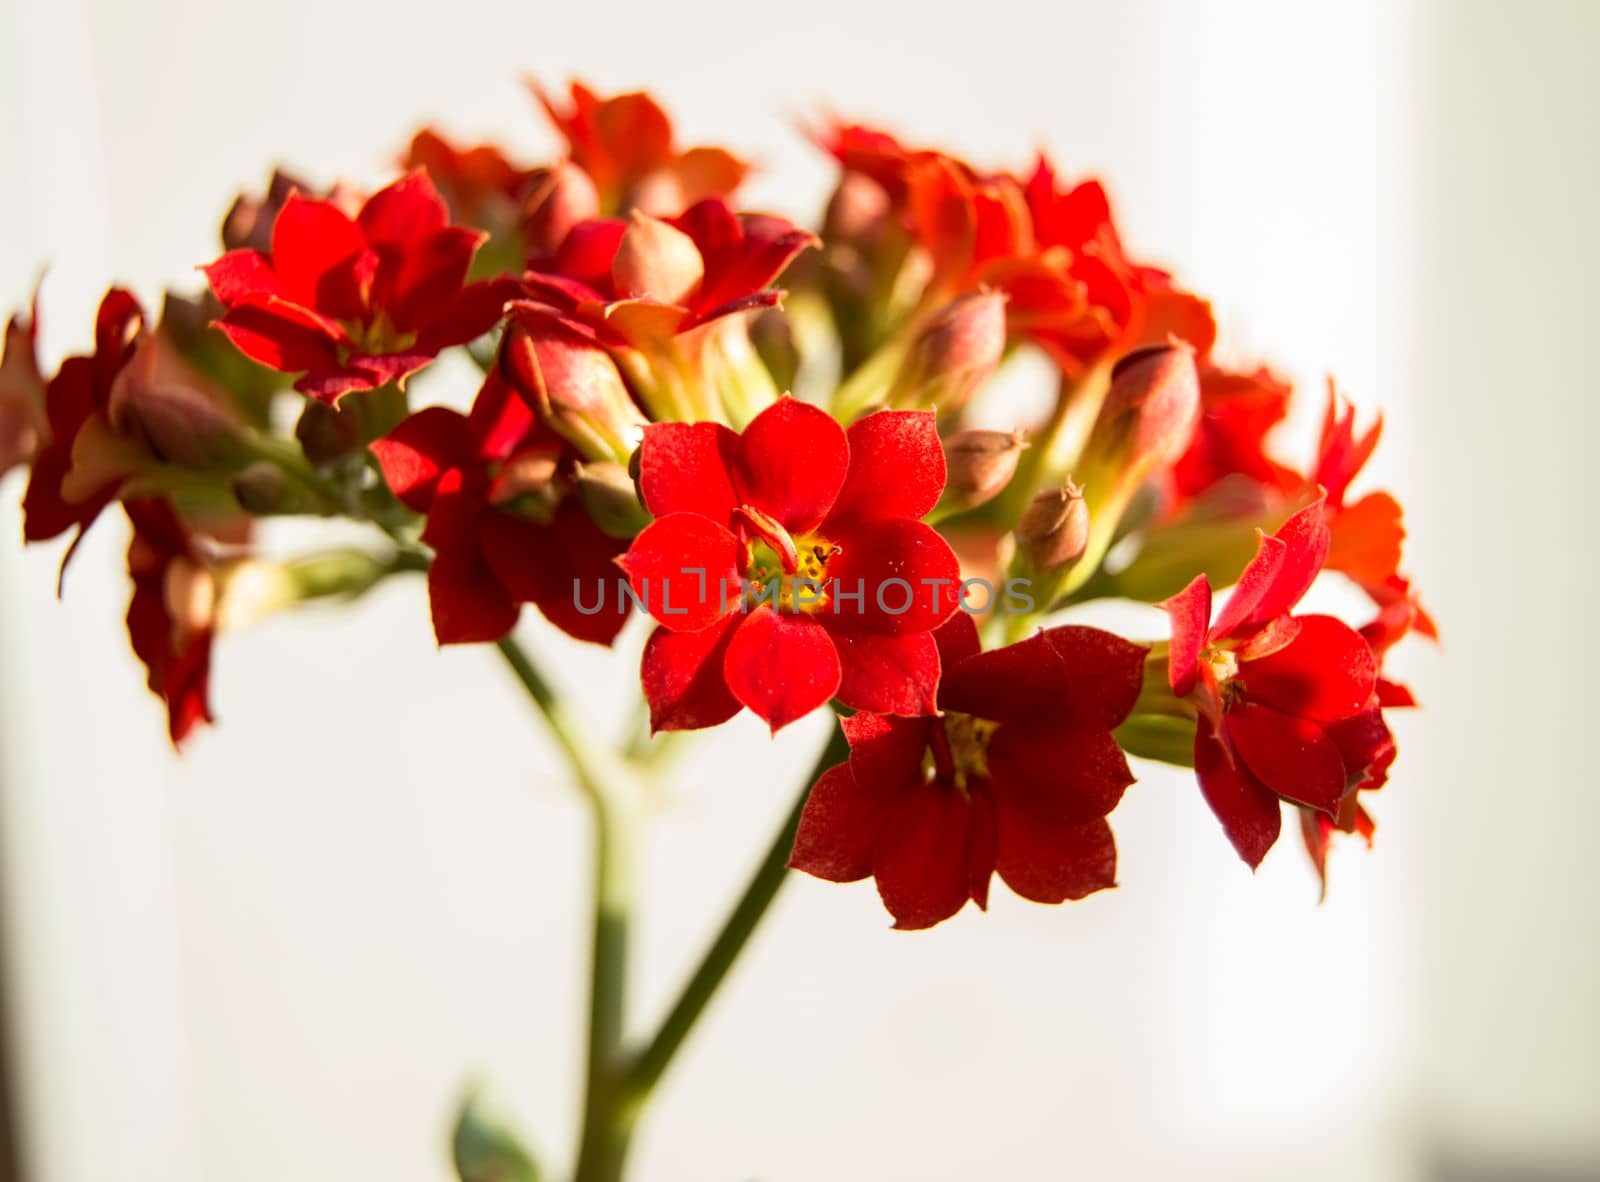 Kalanchoe red flowers, known as Kalanchoe laciniata, houseplant by claire_lucia